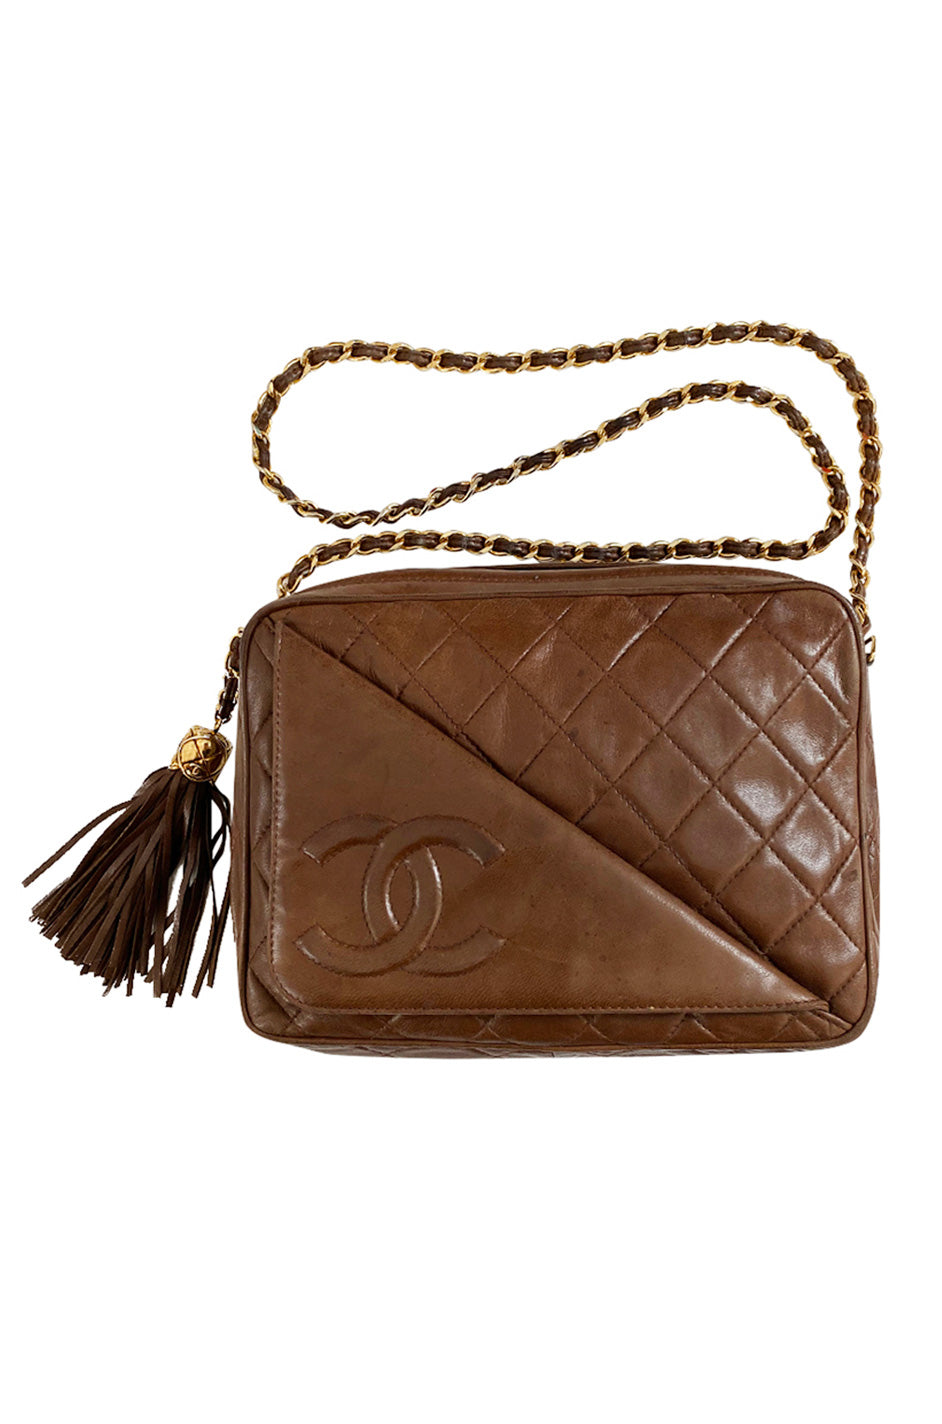 chanel bag with chain handle